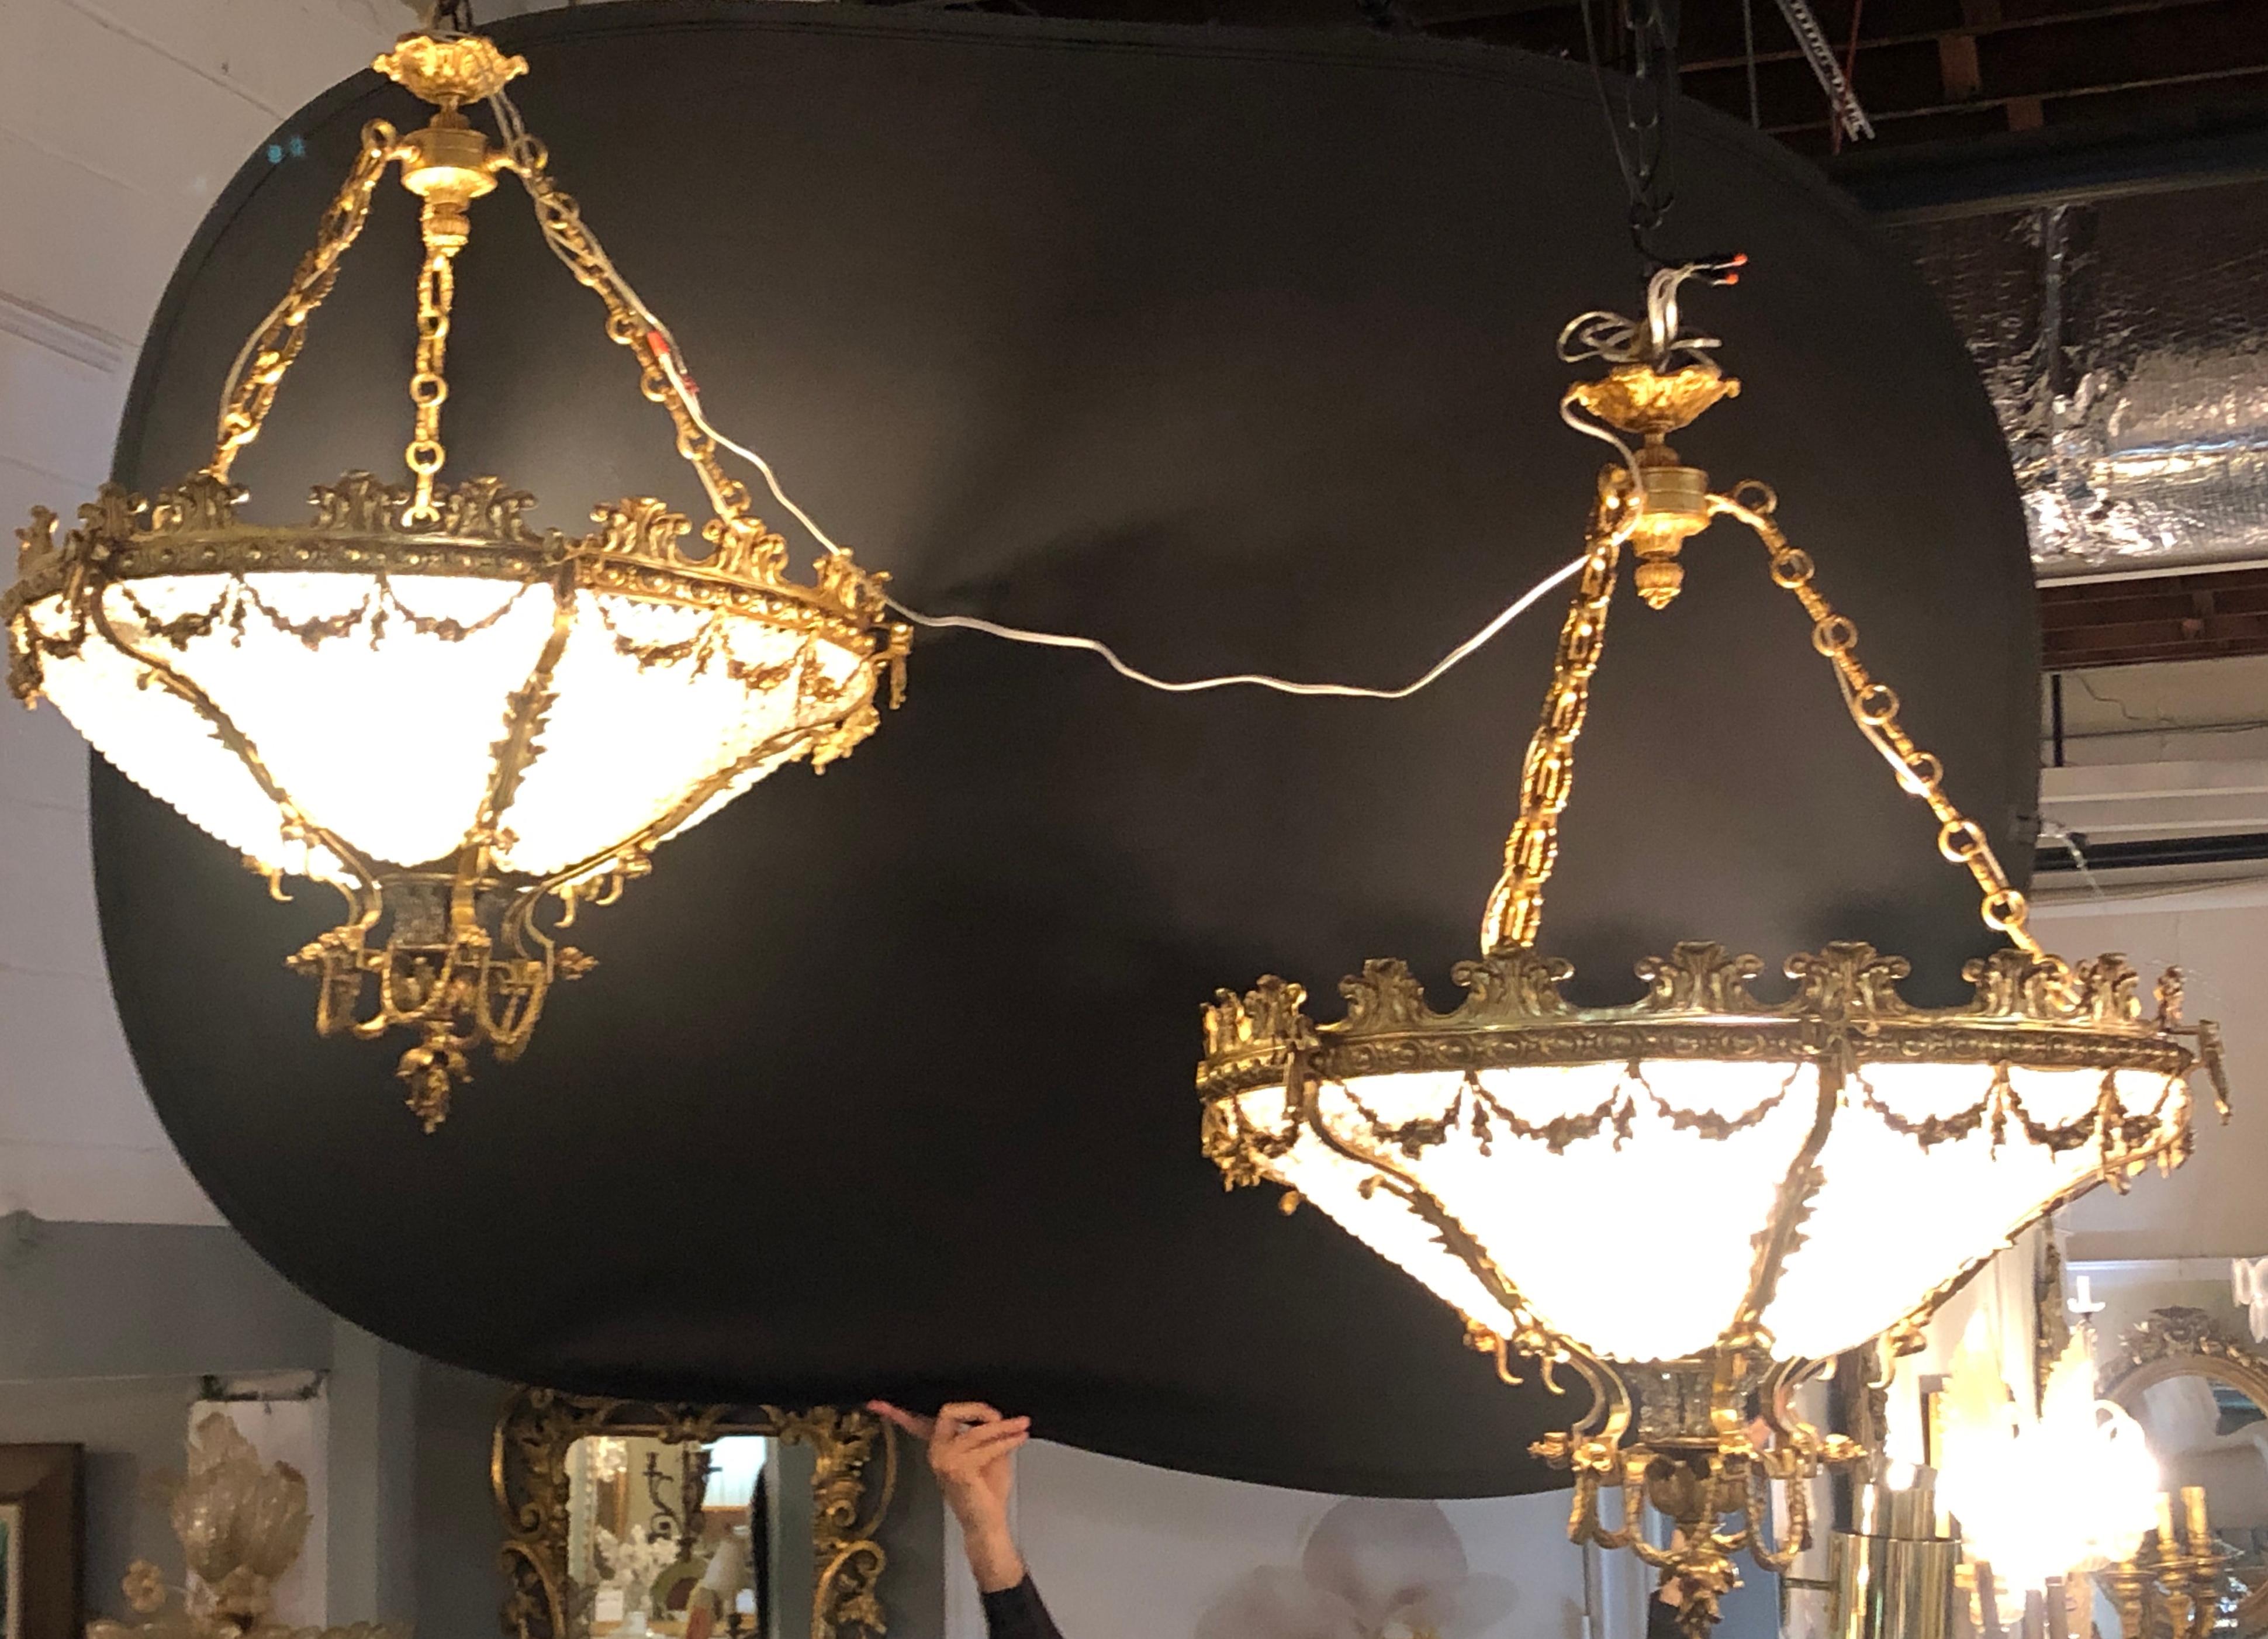 A pair of large and impressive doré or gilt bronze Louis XVI style beaded chandeliers with bow-tie decoration. These fine basket beaded chandeliers have a wide crystal basket framed in a doré bronze frame of scroll, floral and shell design. The